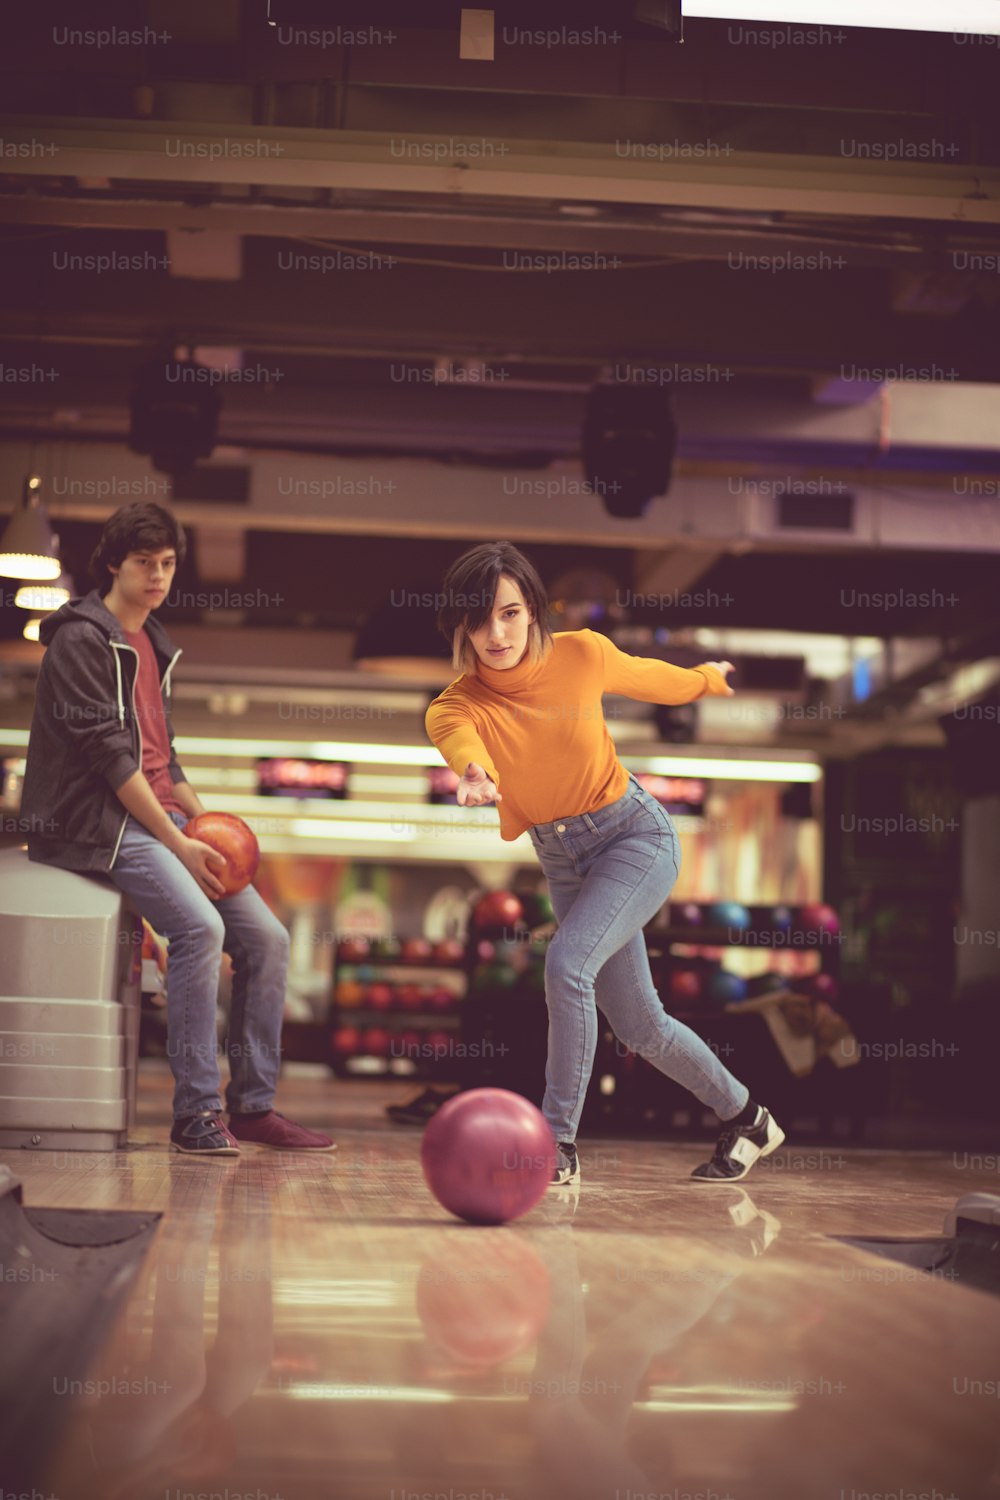 Couple in bowling alley. Woman throws a bowling ball.